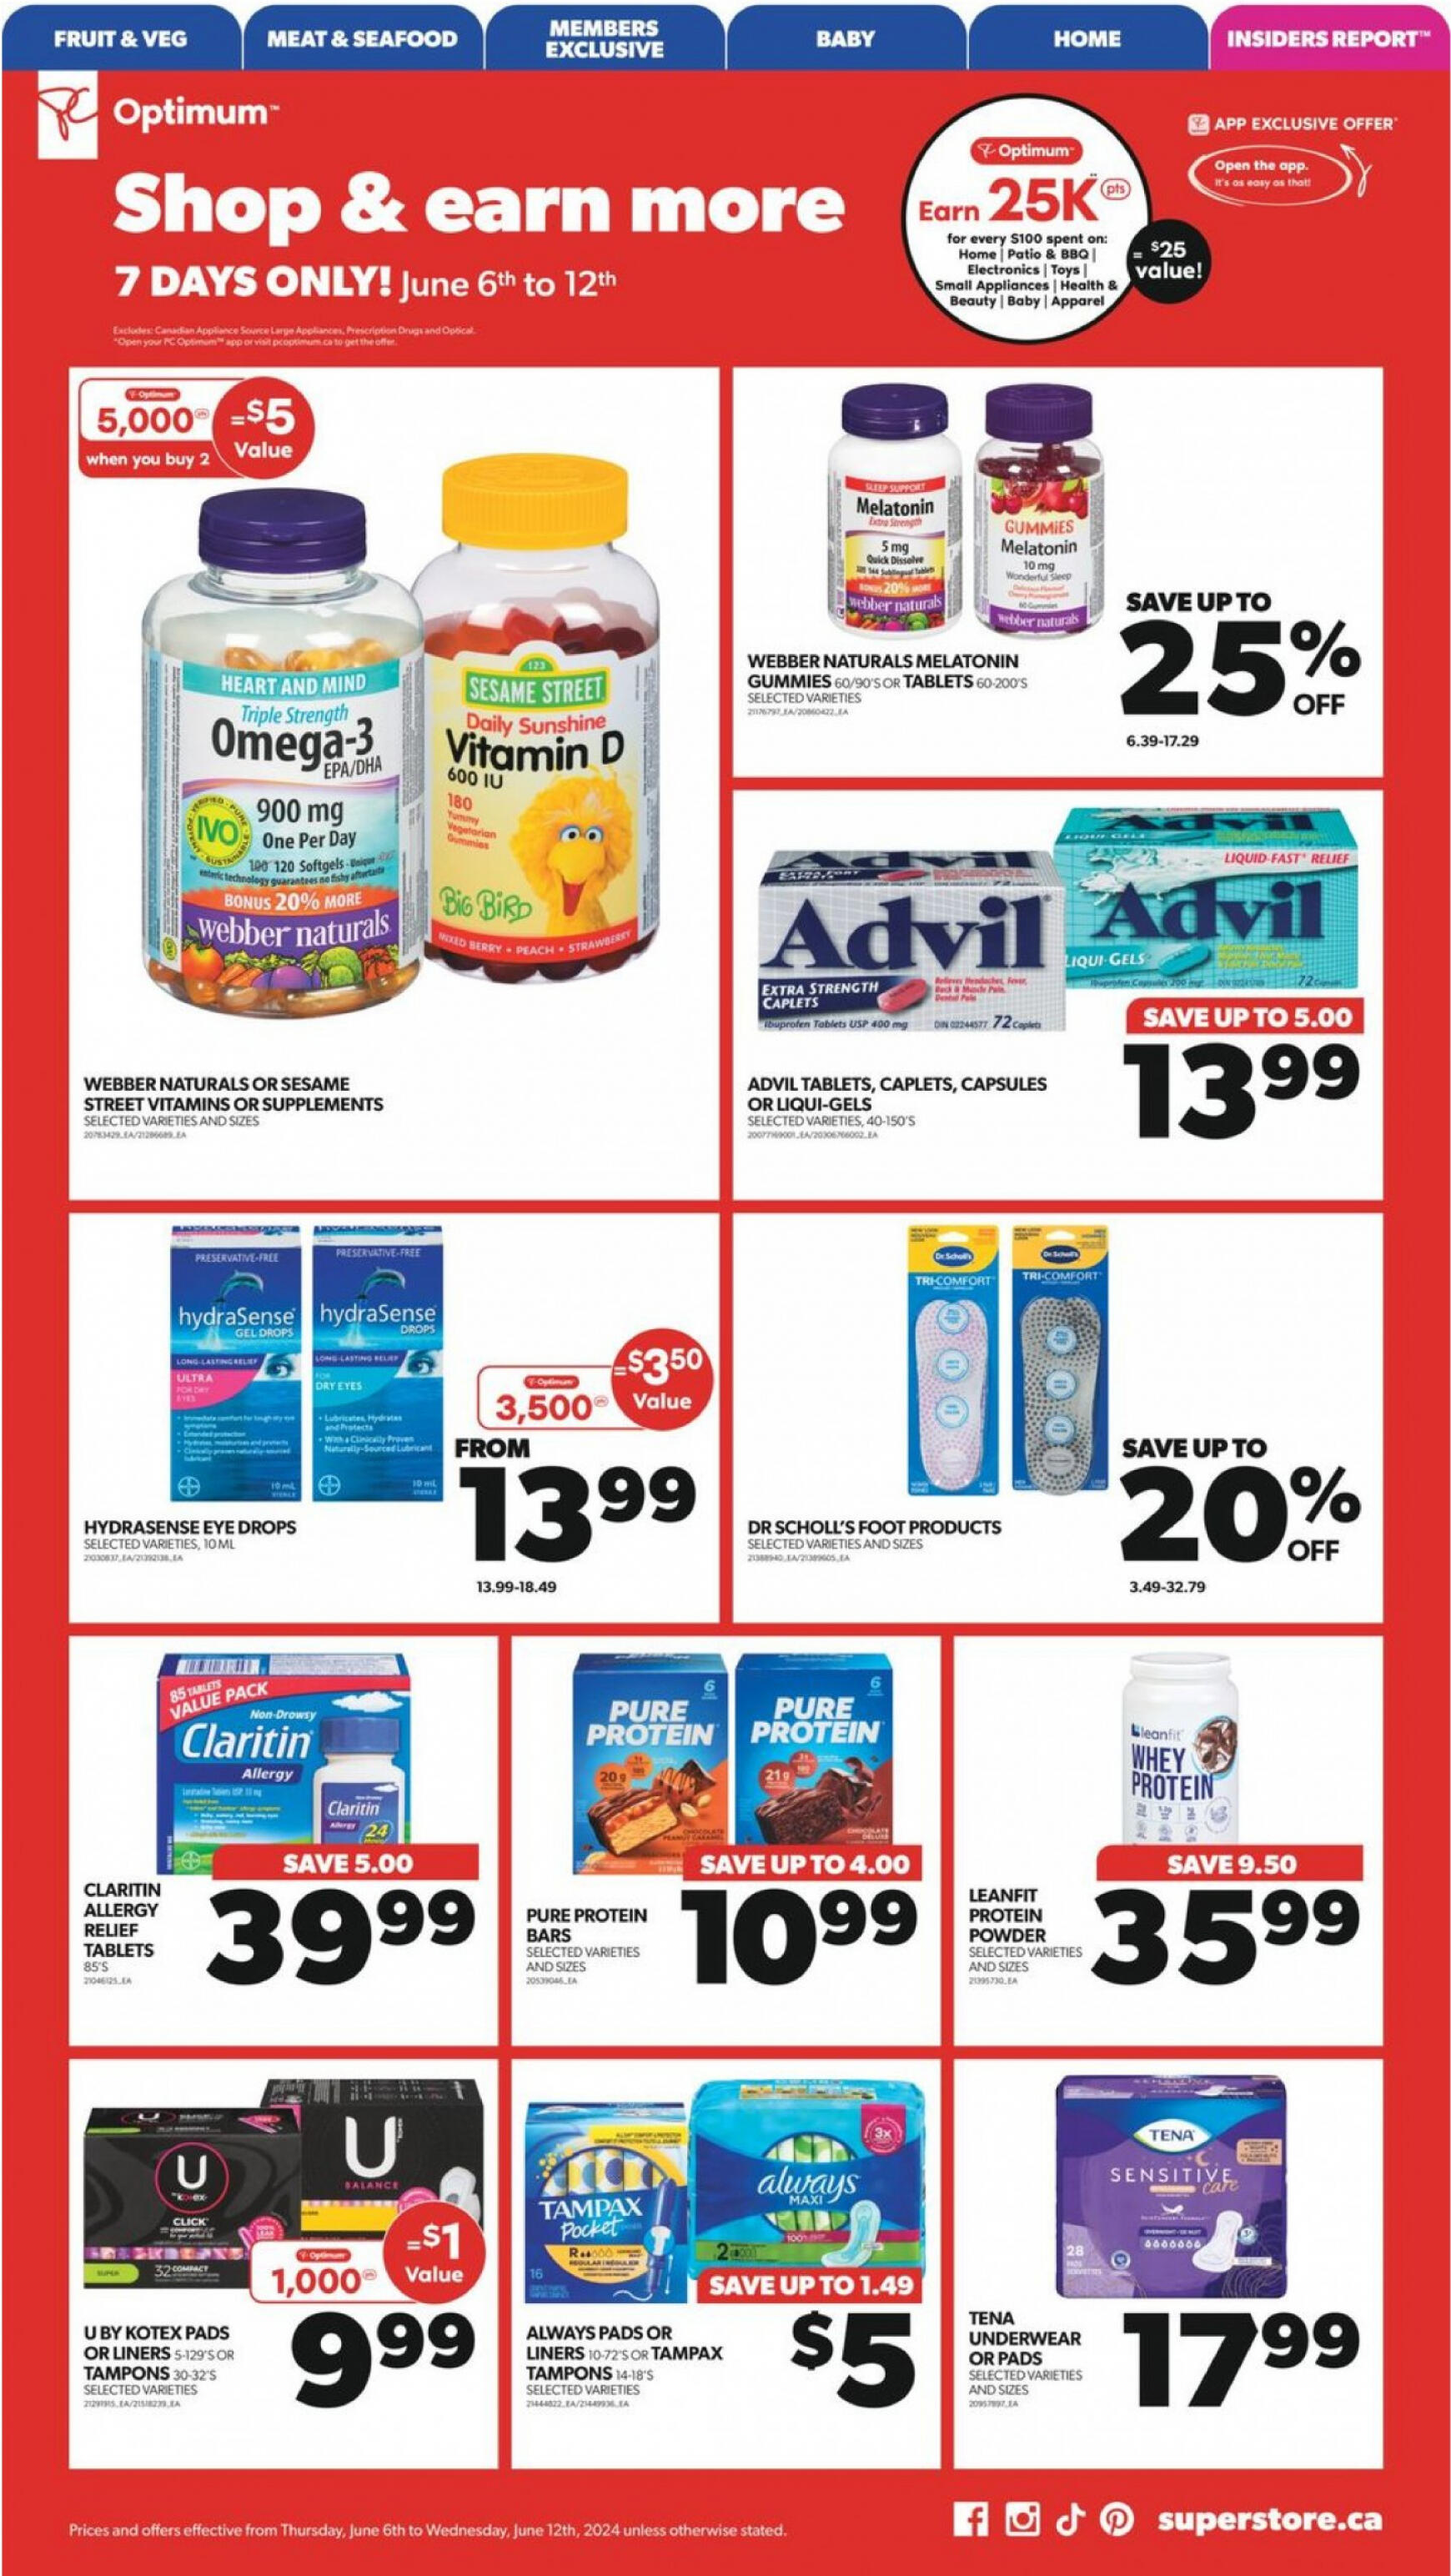 real-canadian-superstore - Real Canadian Superstore flyer current 06.06. - 12.06. - page: 22